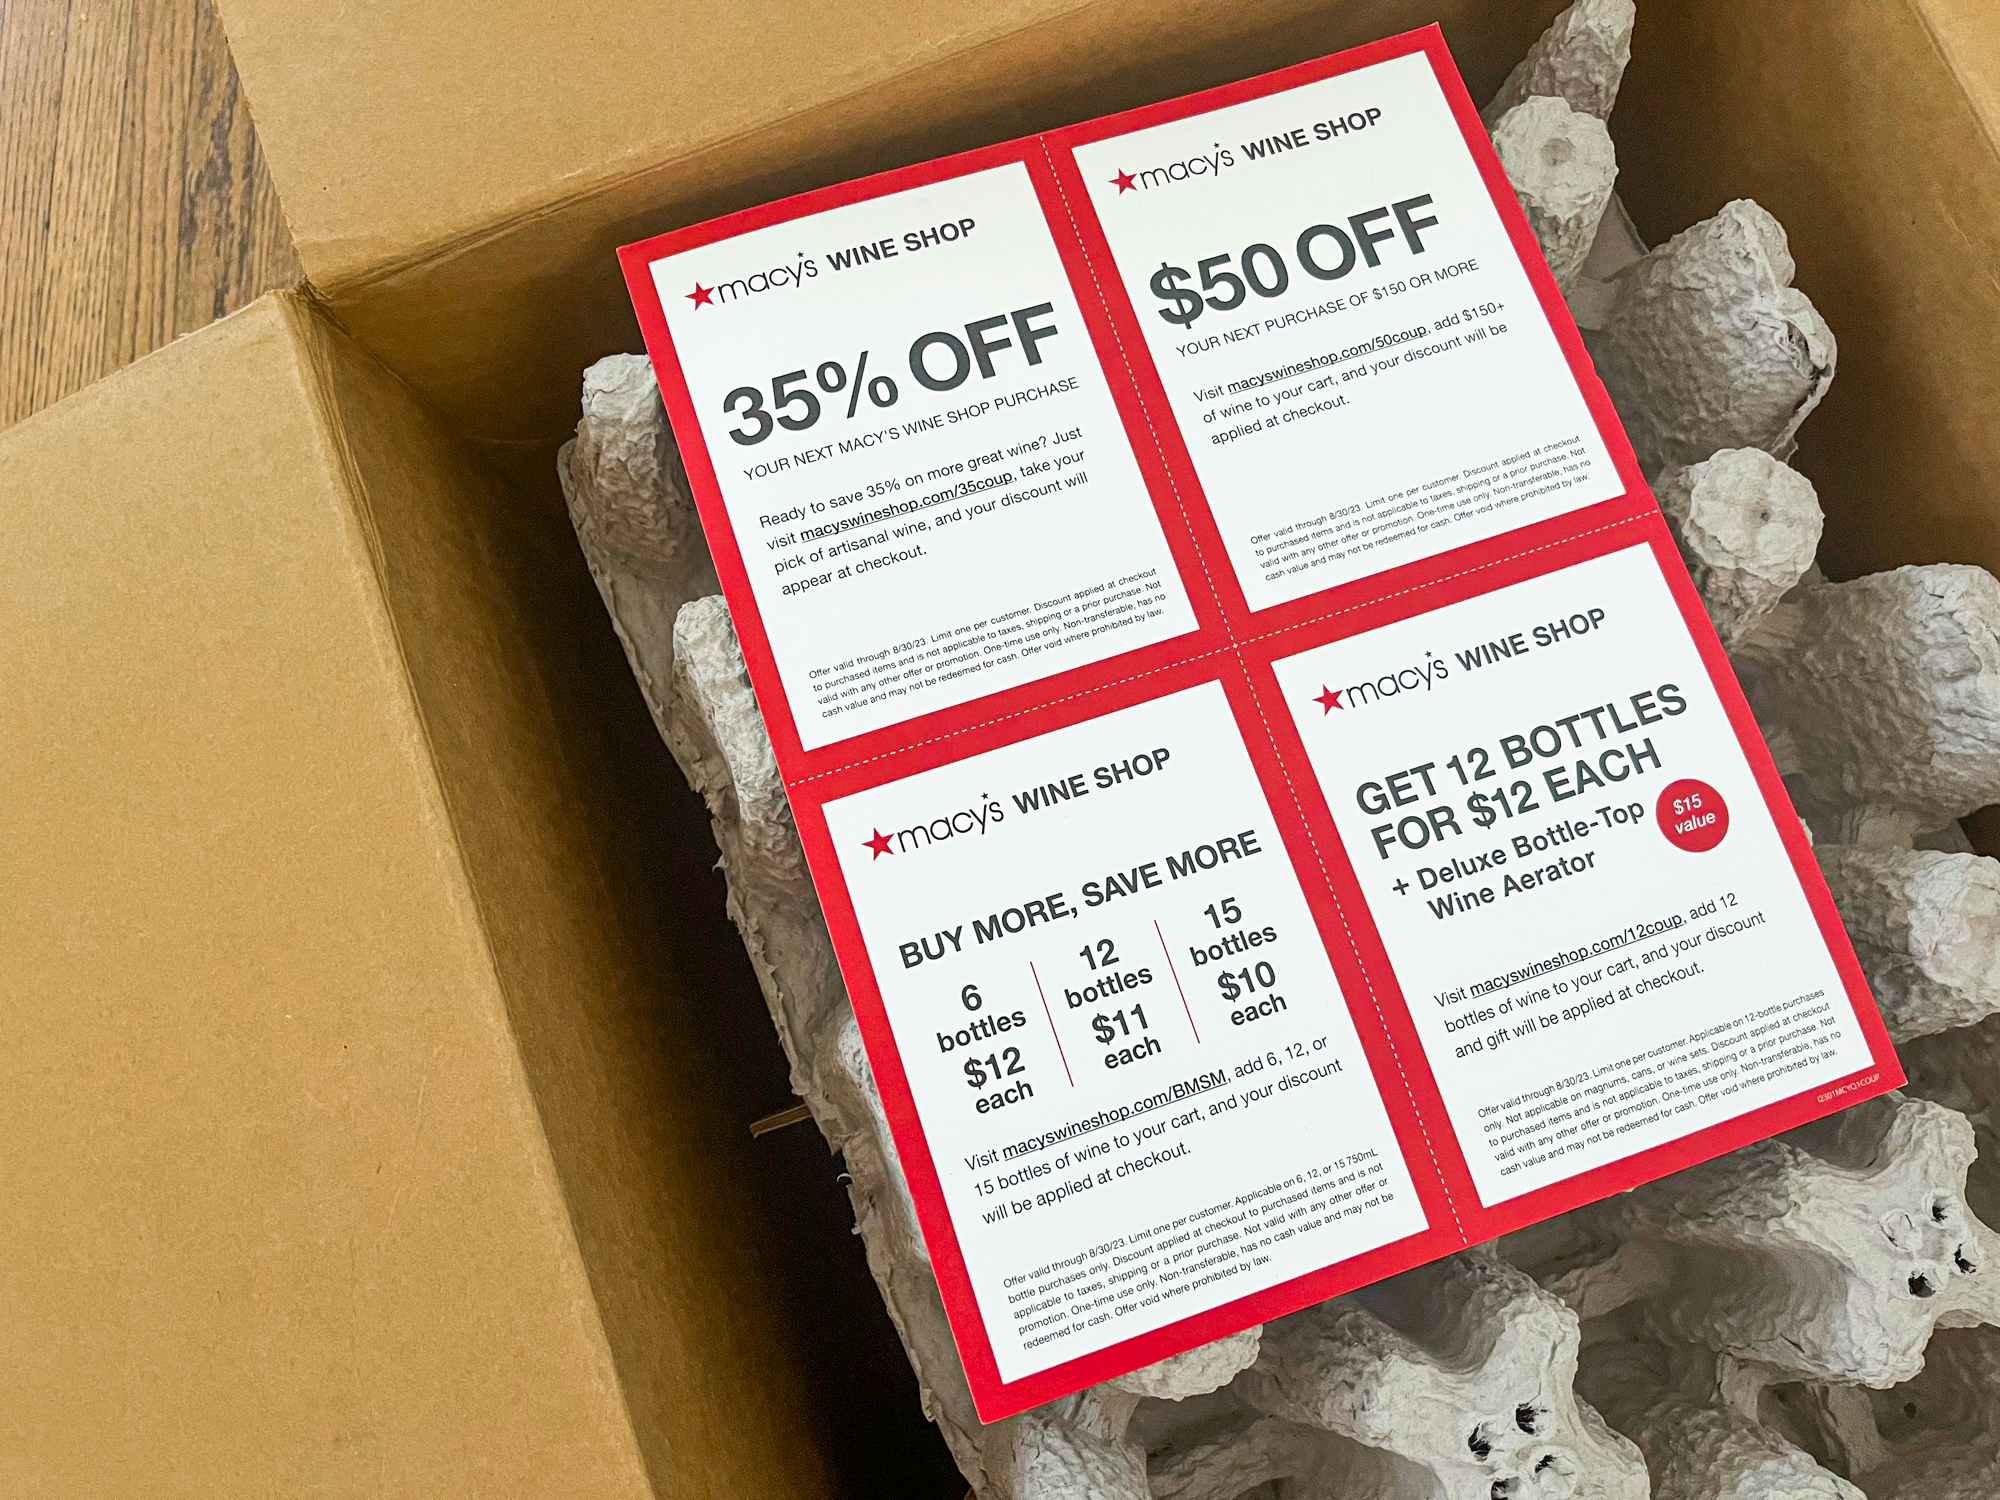 Macy's Wine Shop coupons on top of a box